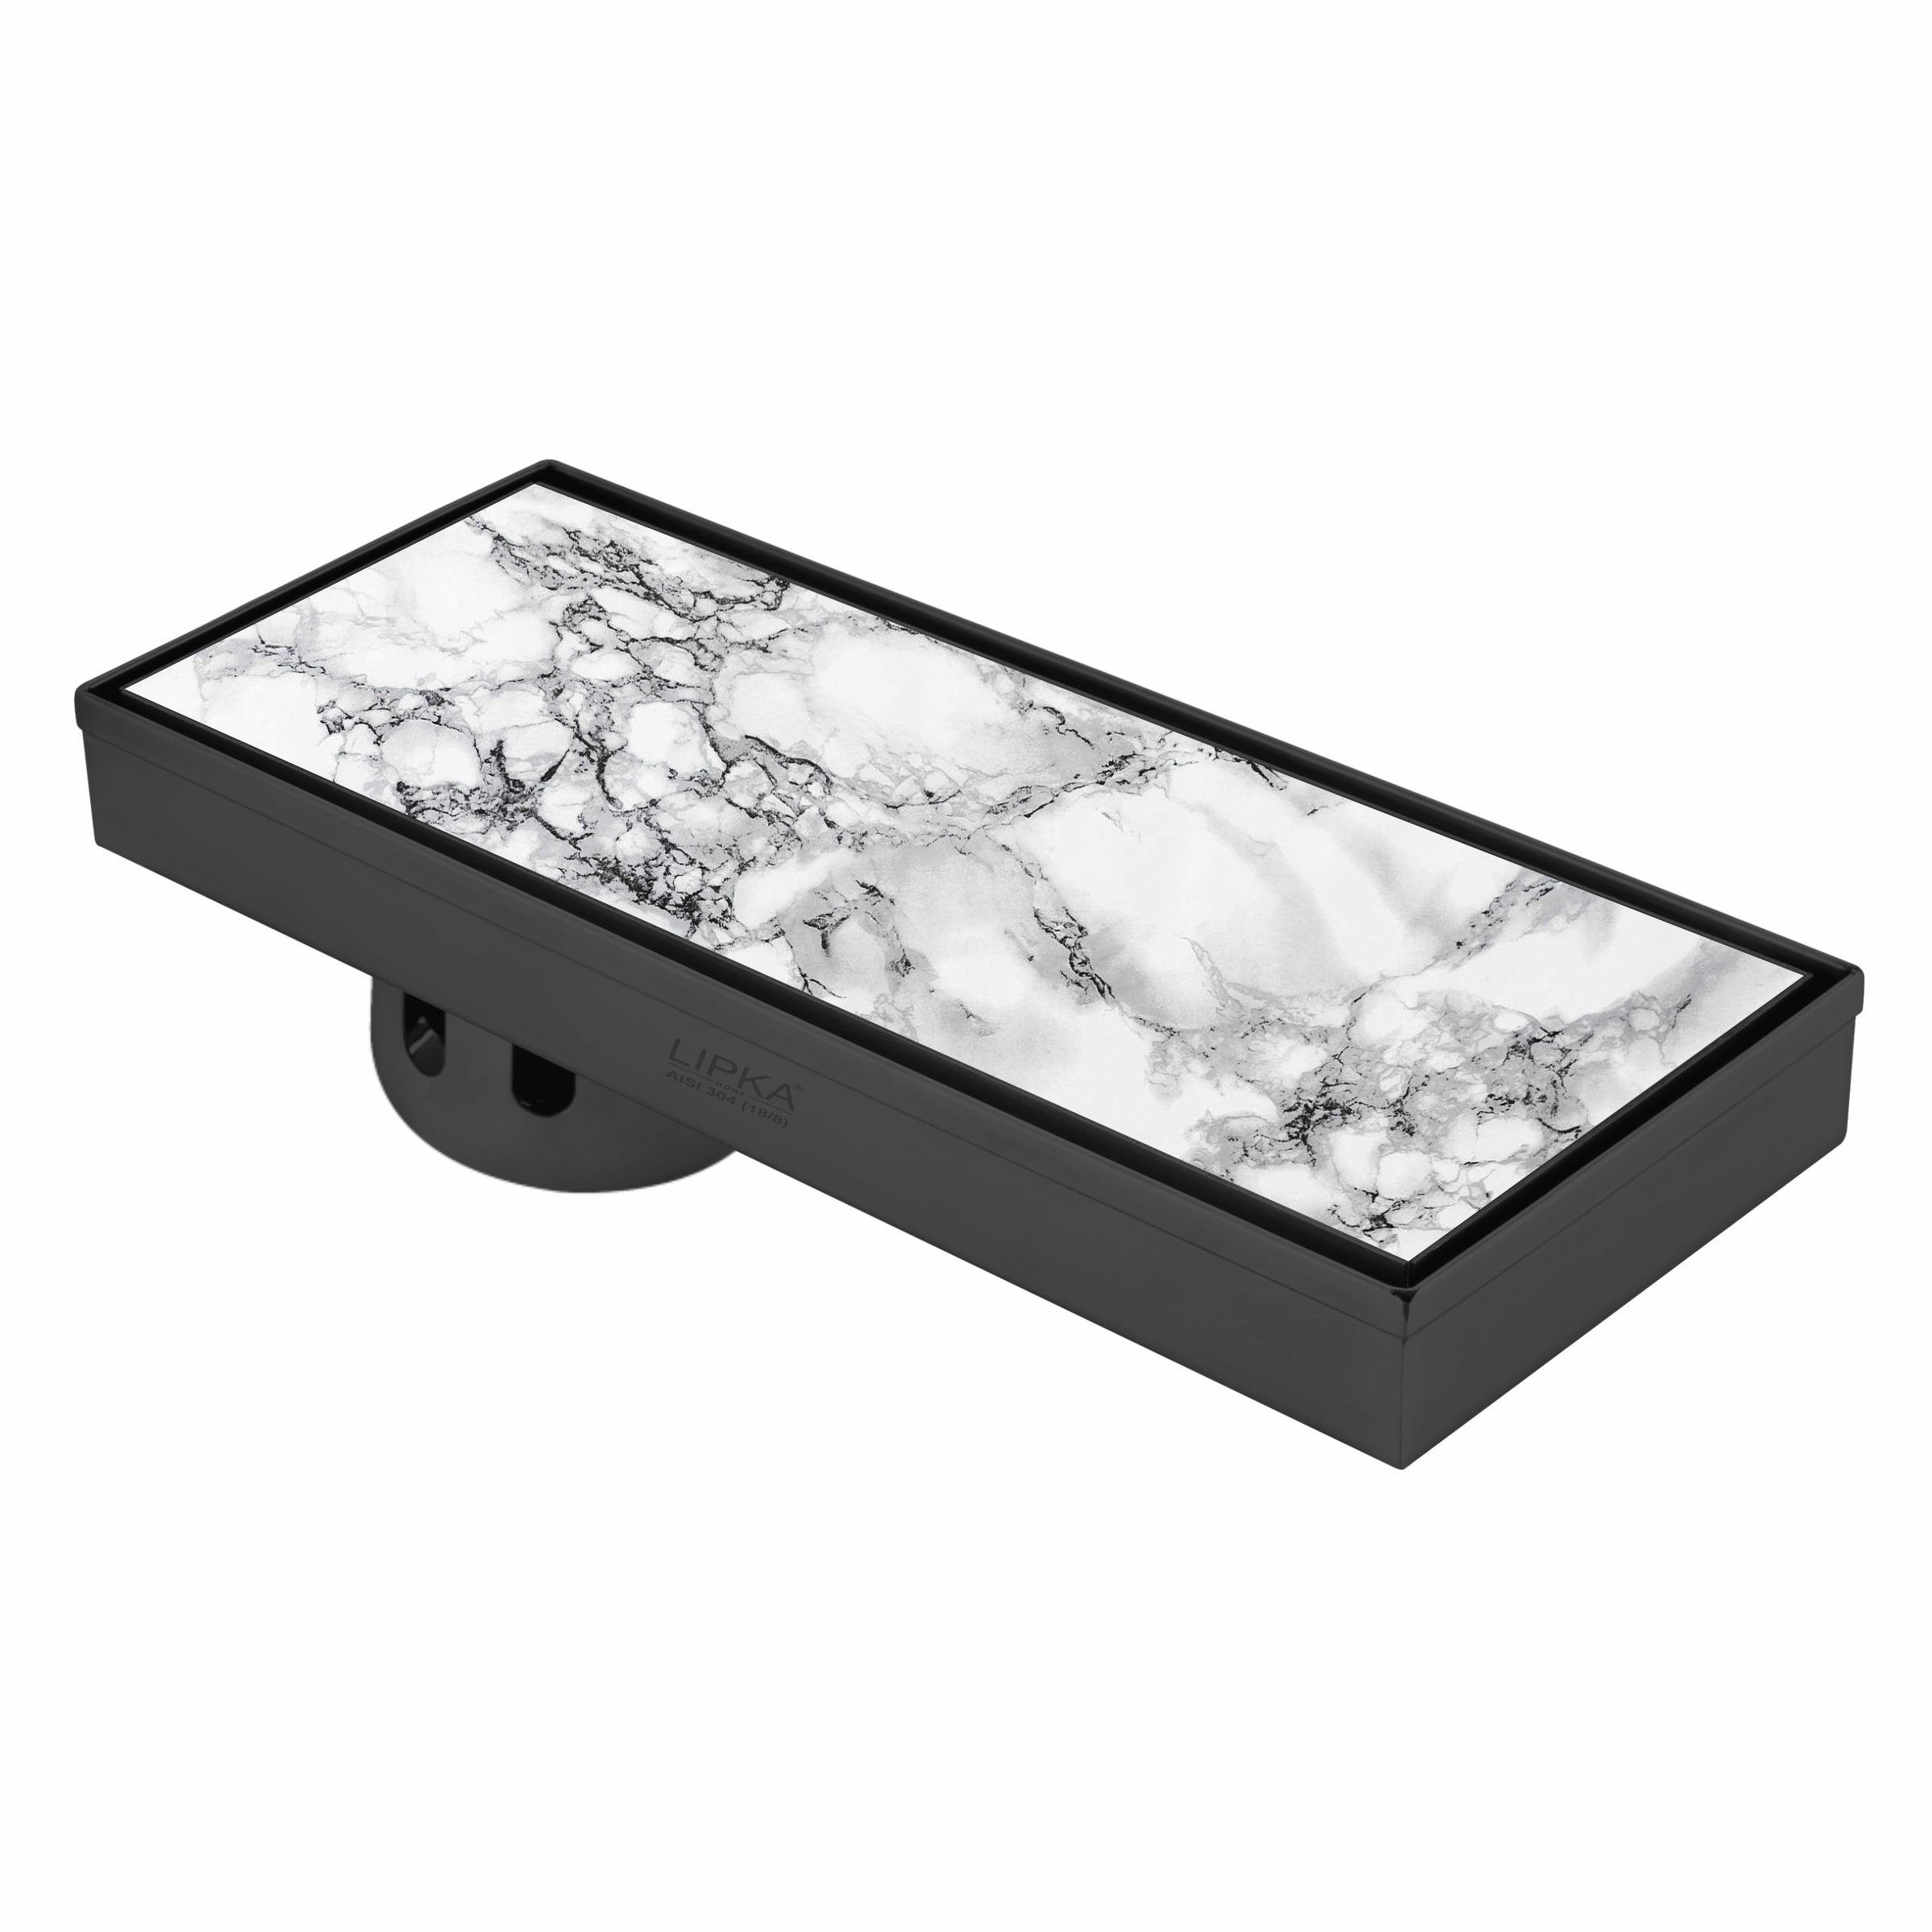 Marble Insert Shower Drain Channel - Black (18 x 5 Inches)